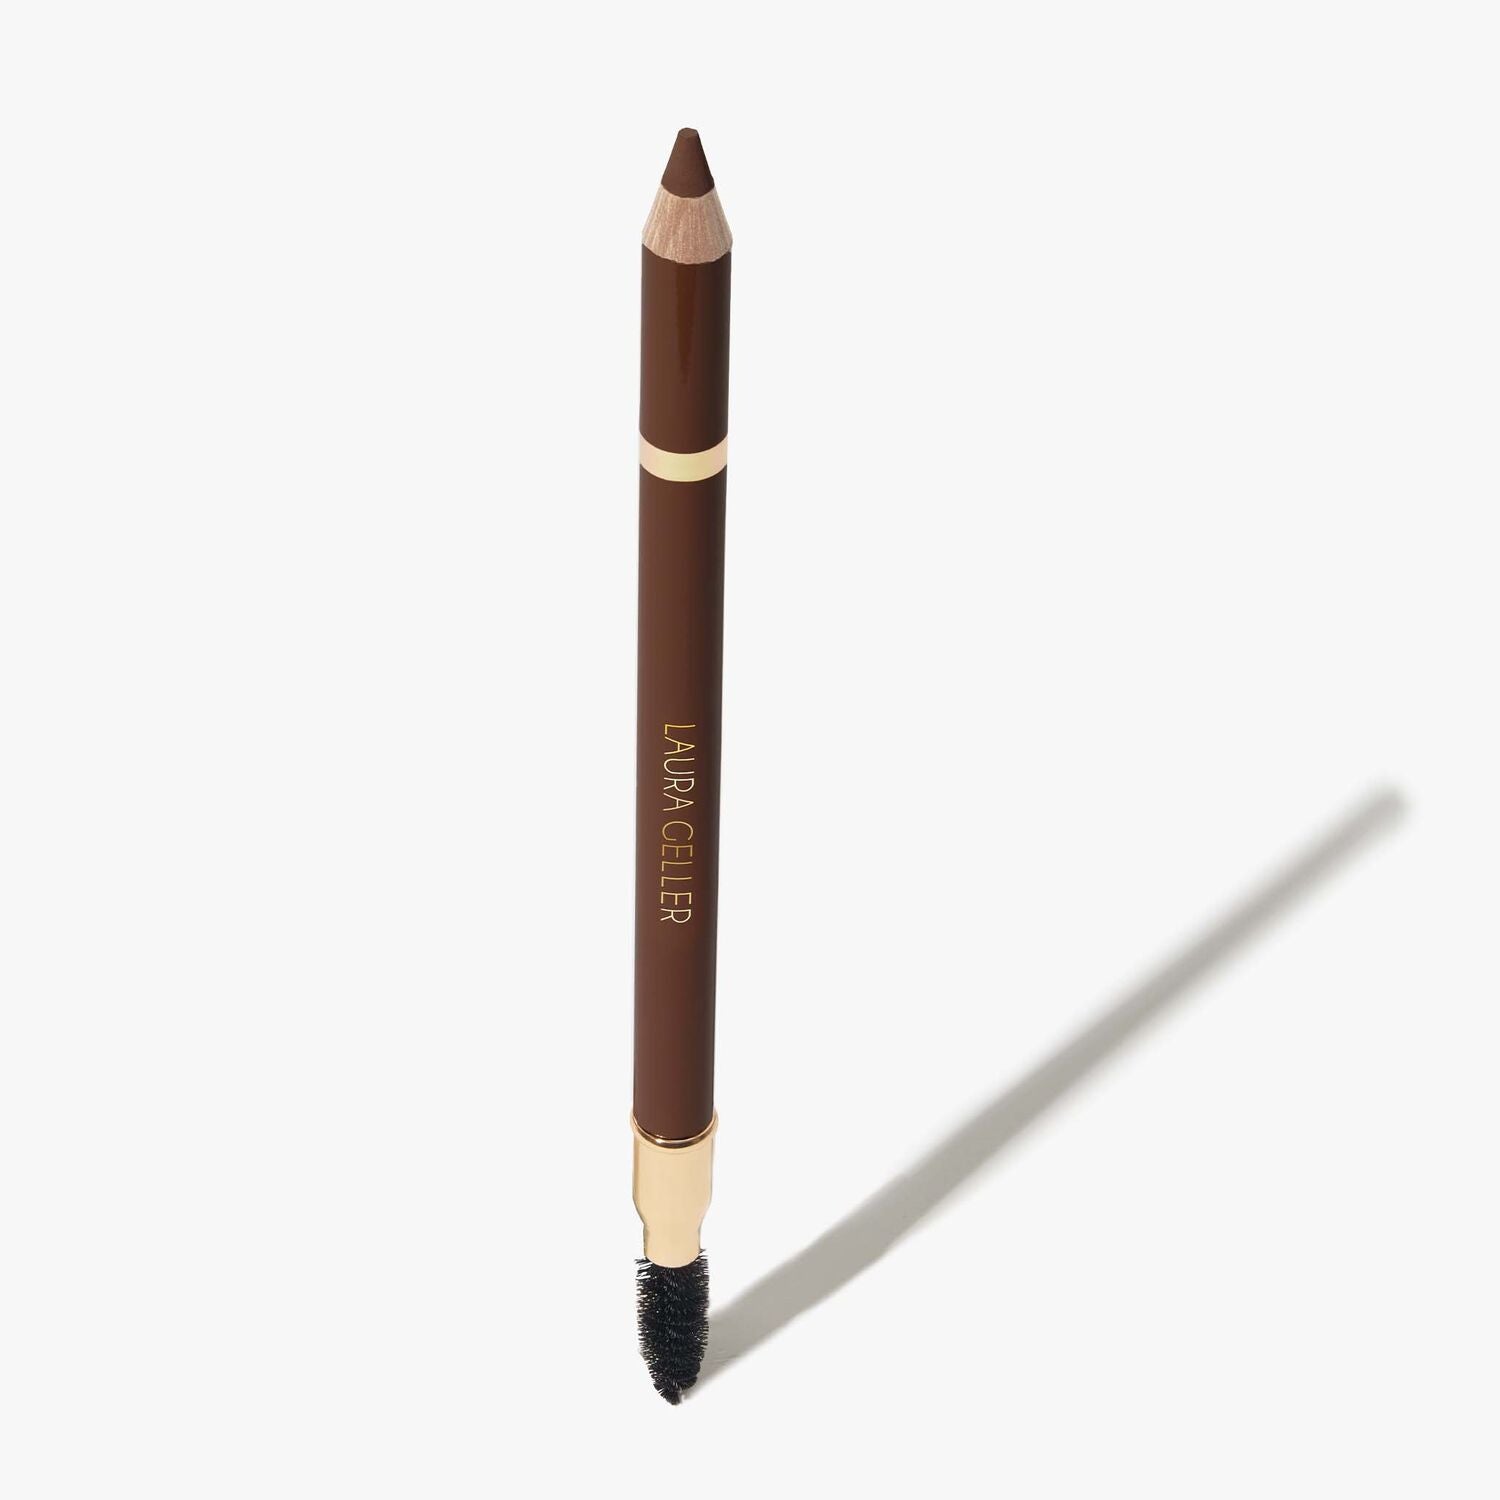 Bravo Brows Soft Pencil + Brush Product image in shade Dark Brown